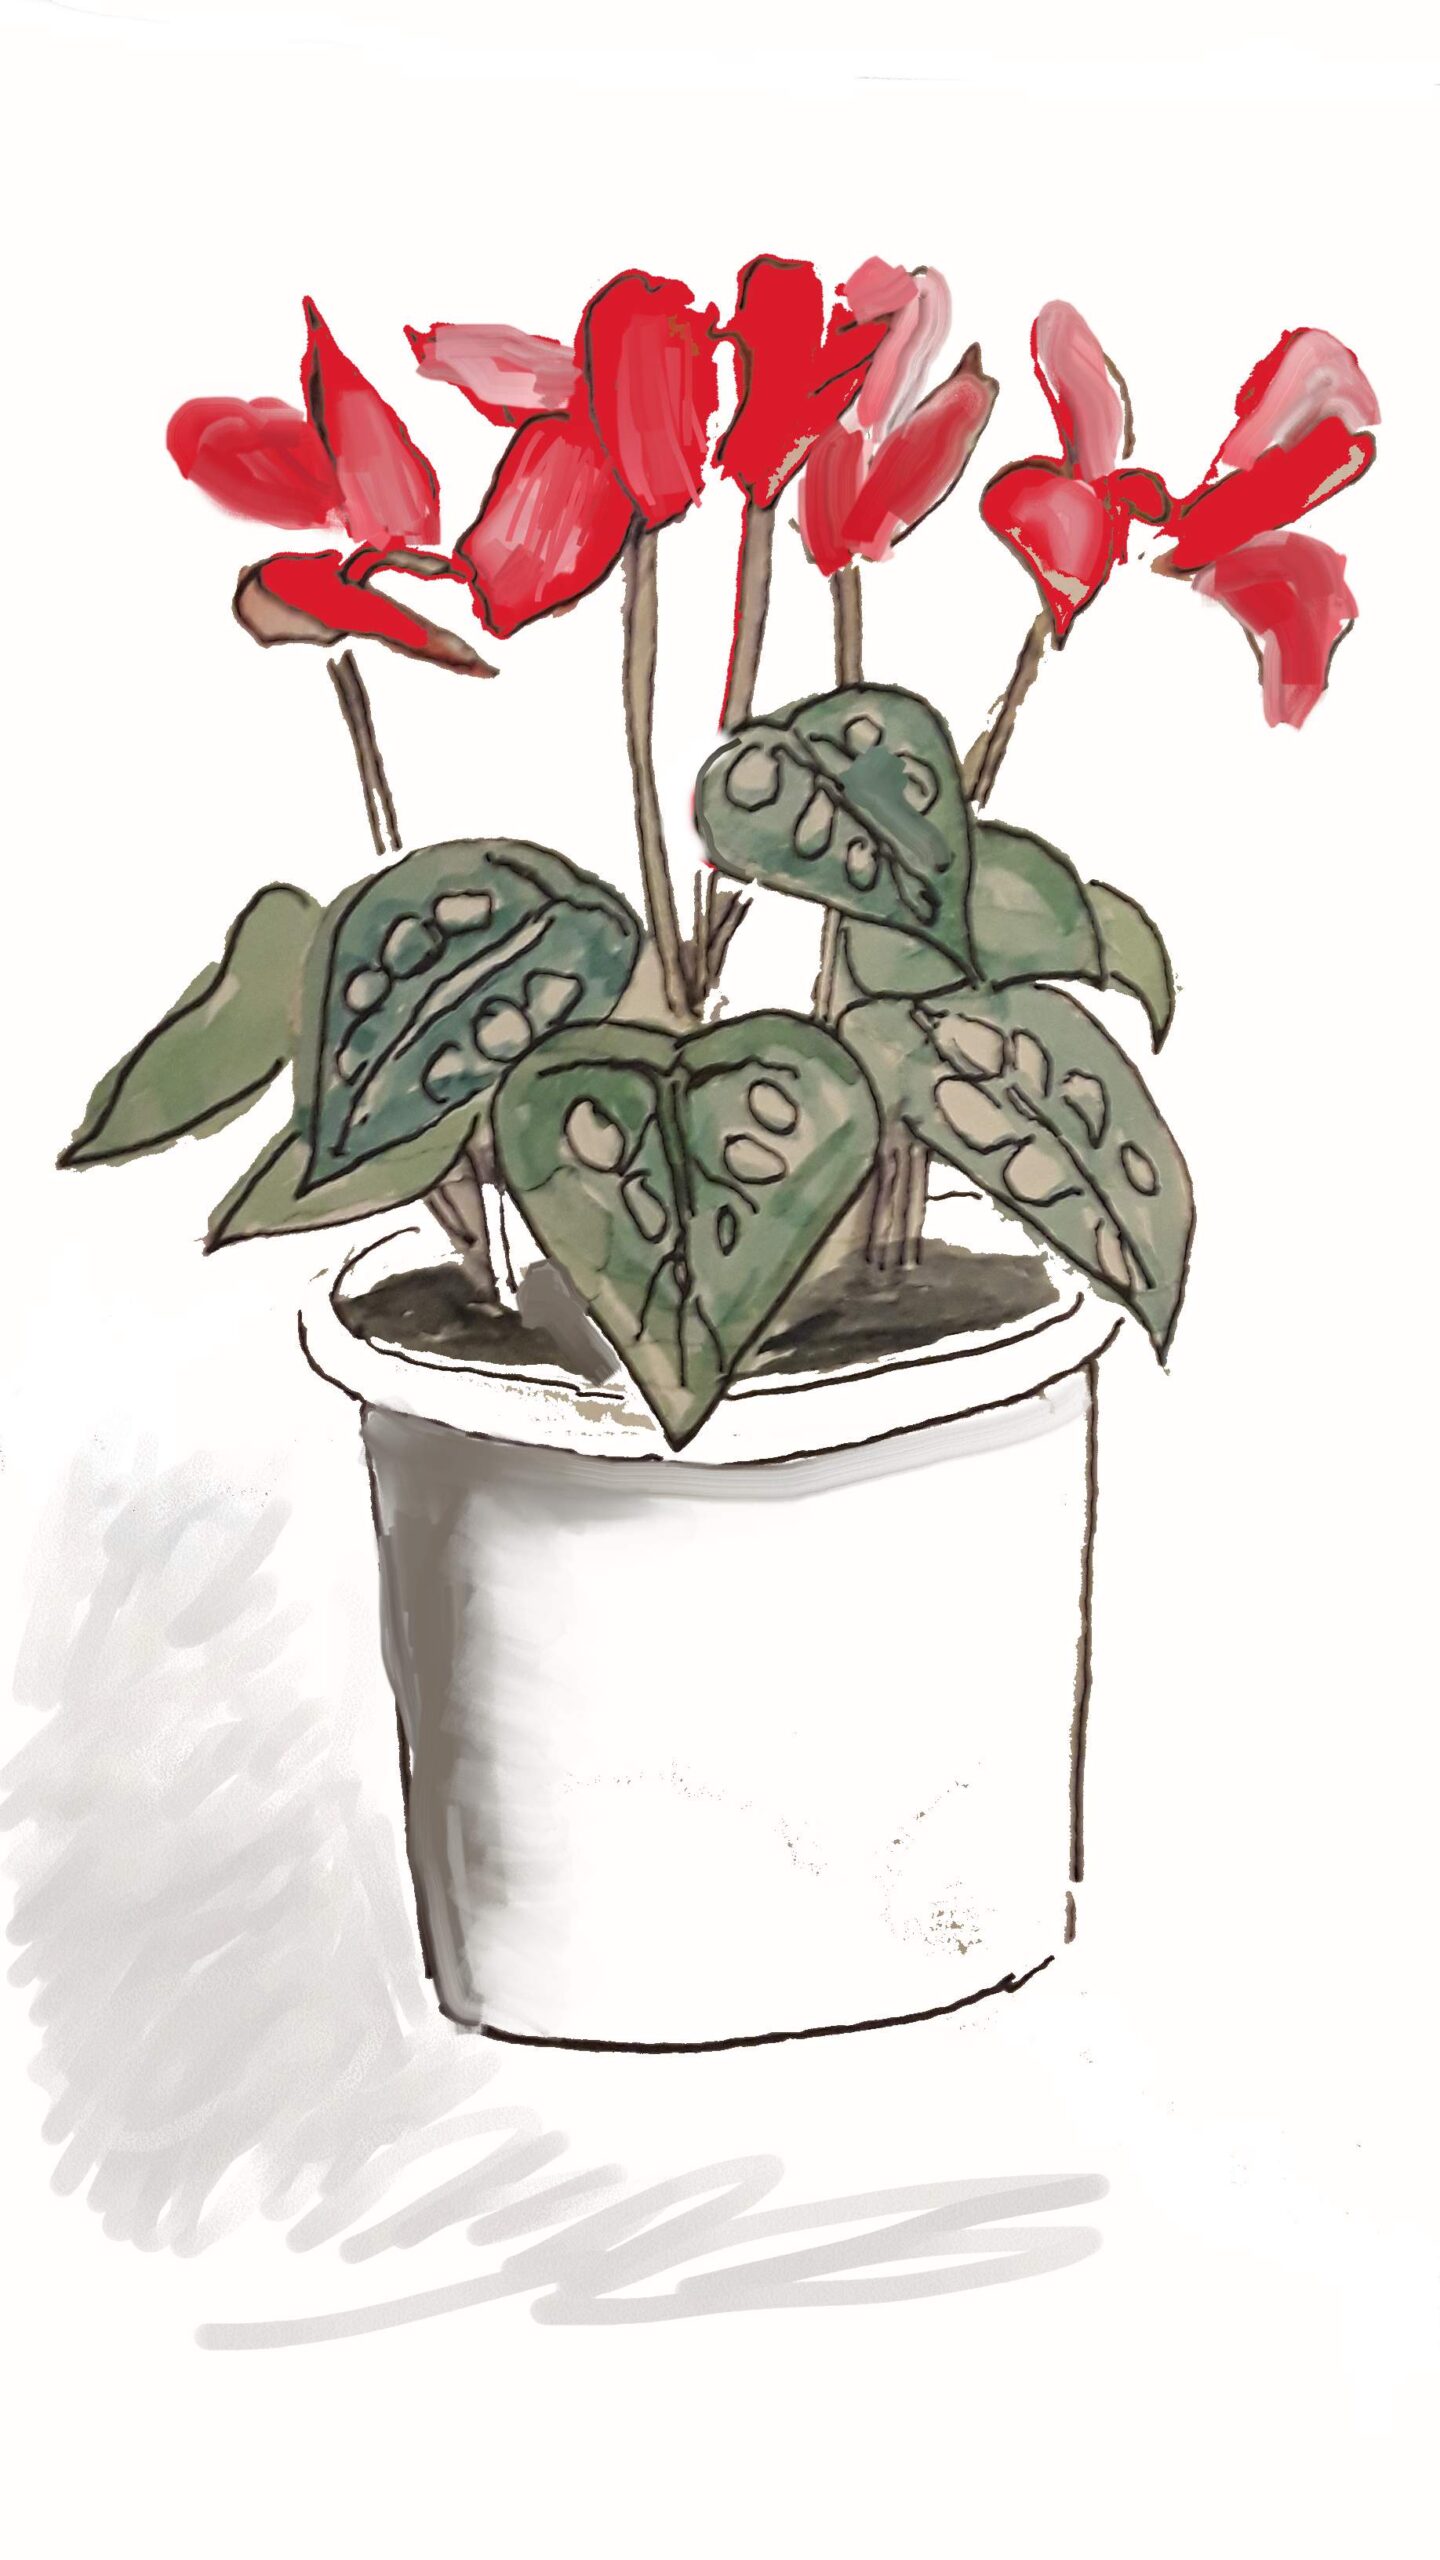 watercolor of red and pink potted cyclamen